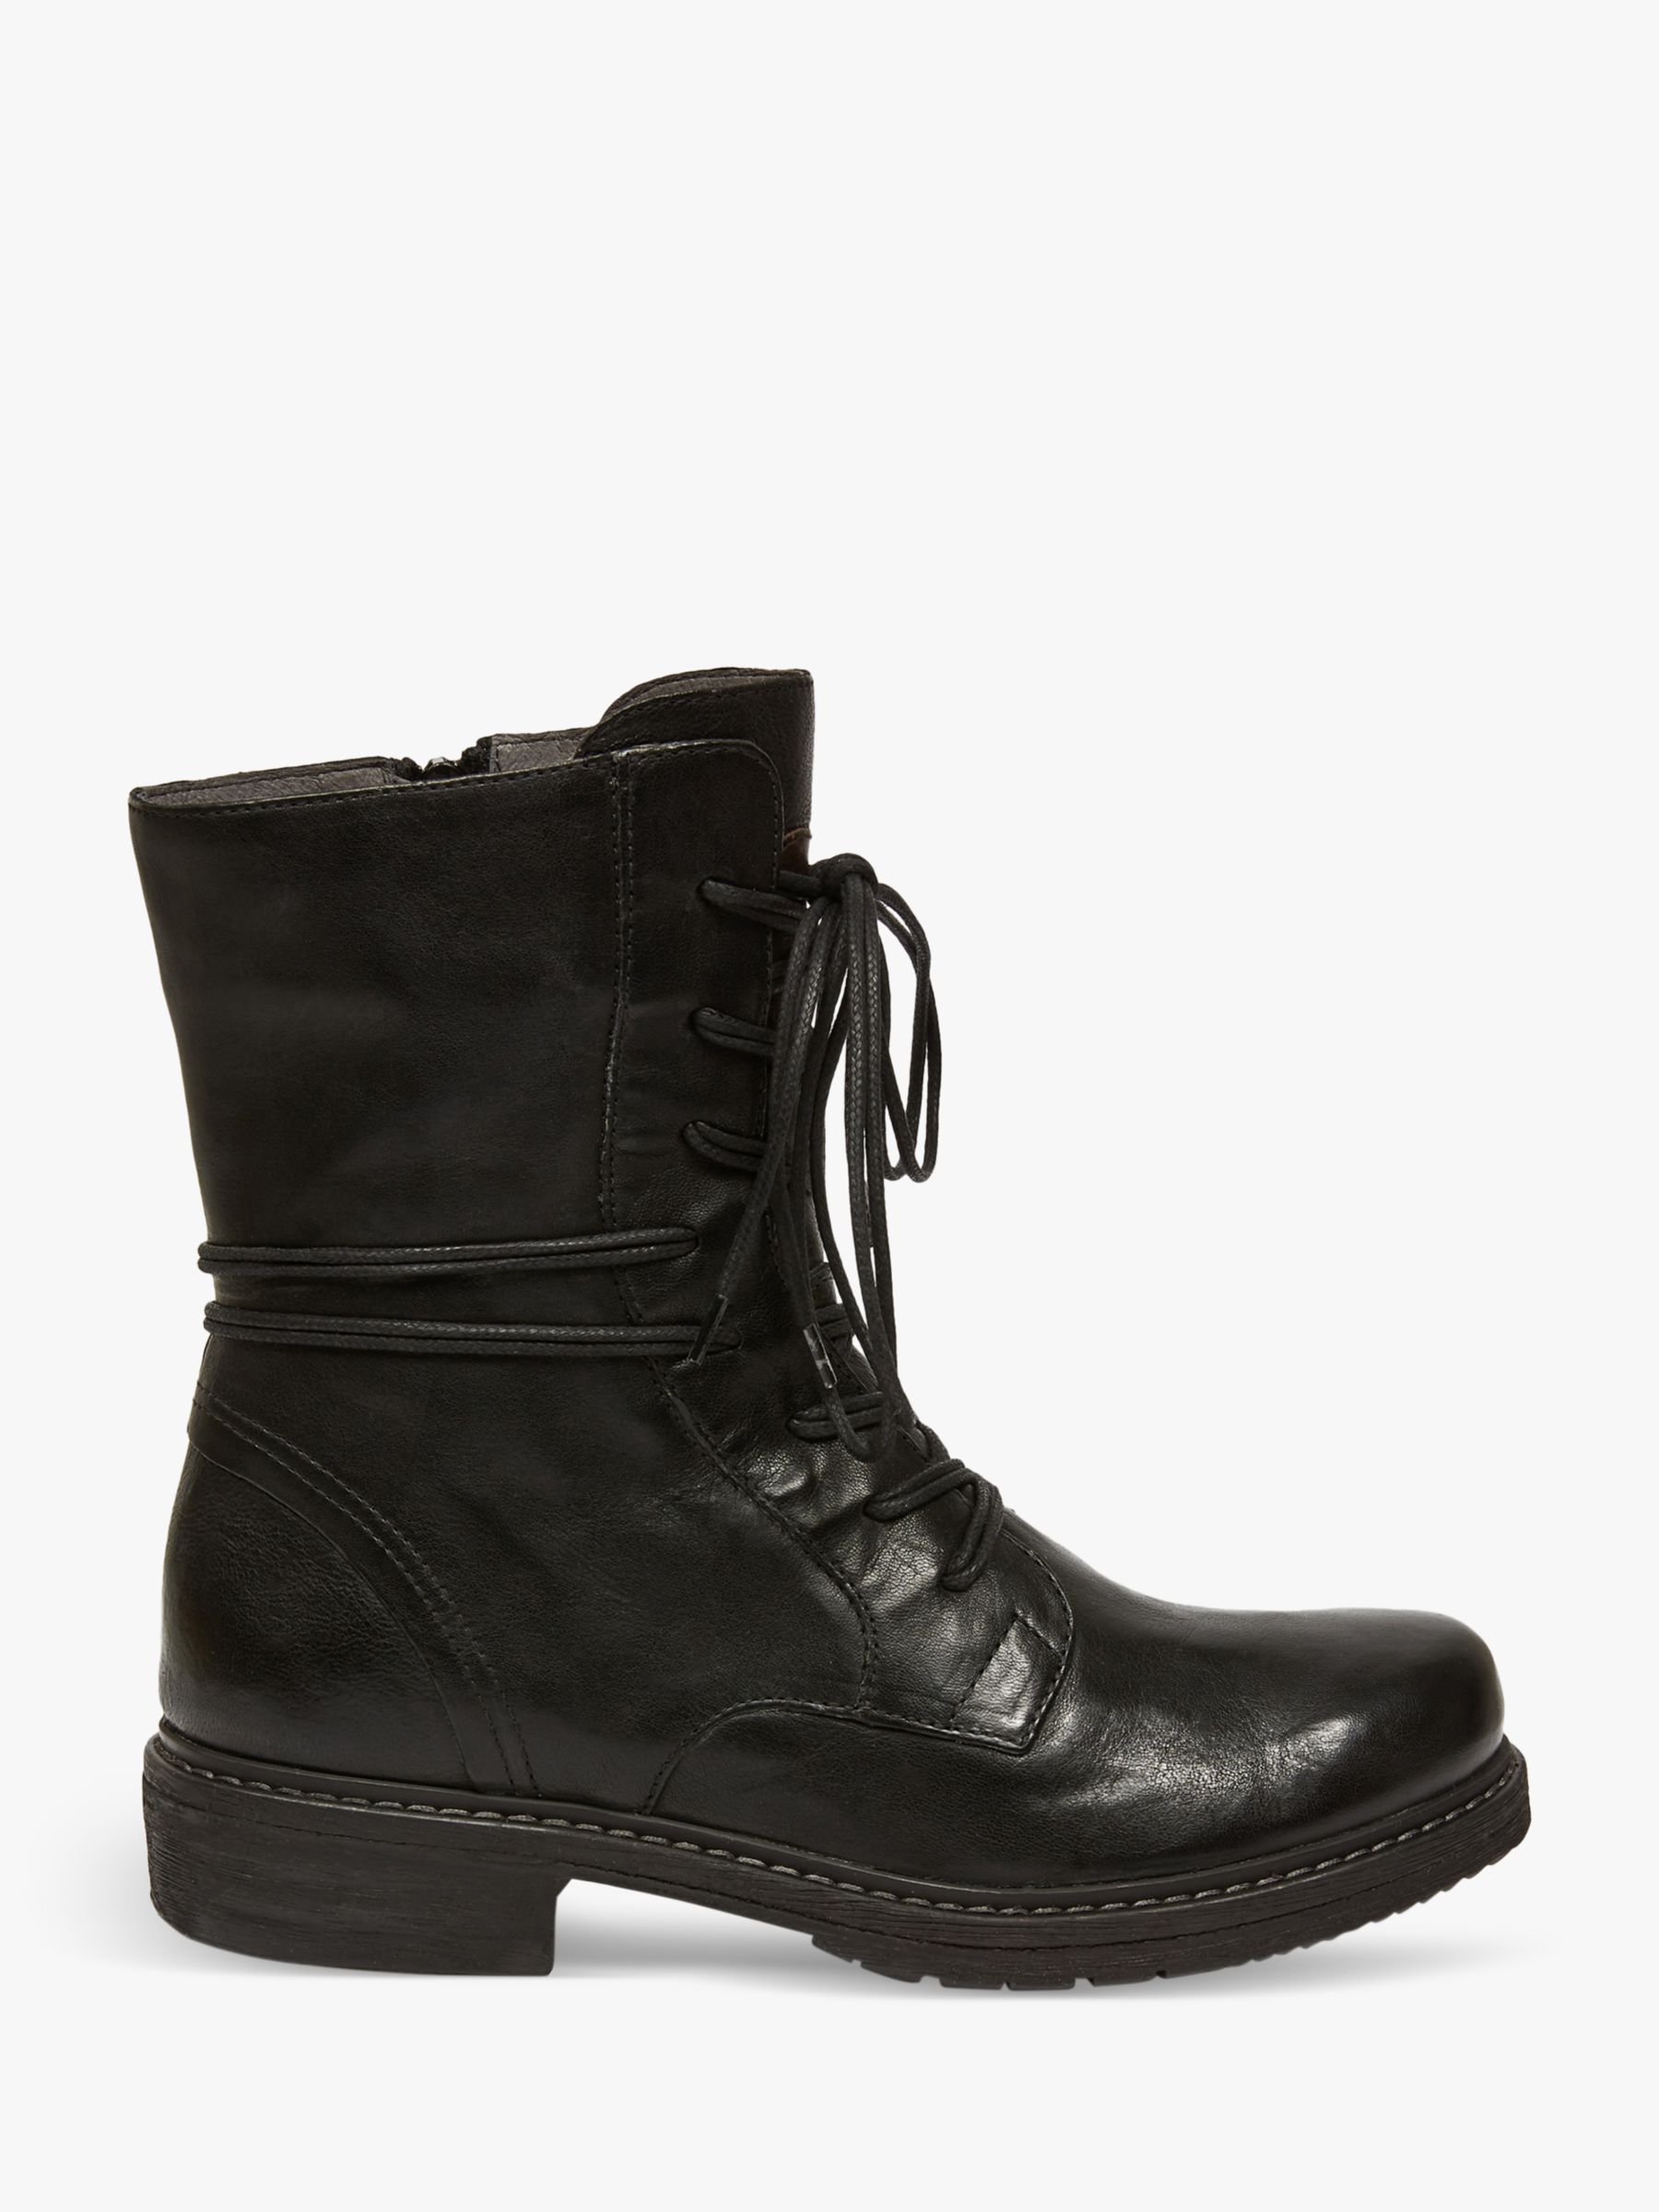 Celtic & Co. Leather Derby Boots, Black at John Lewis & Partners